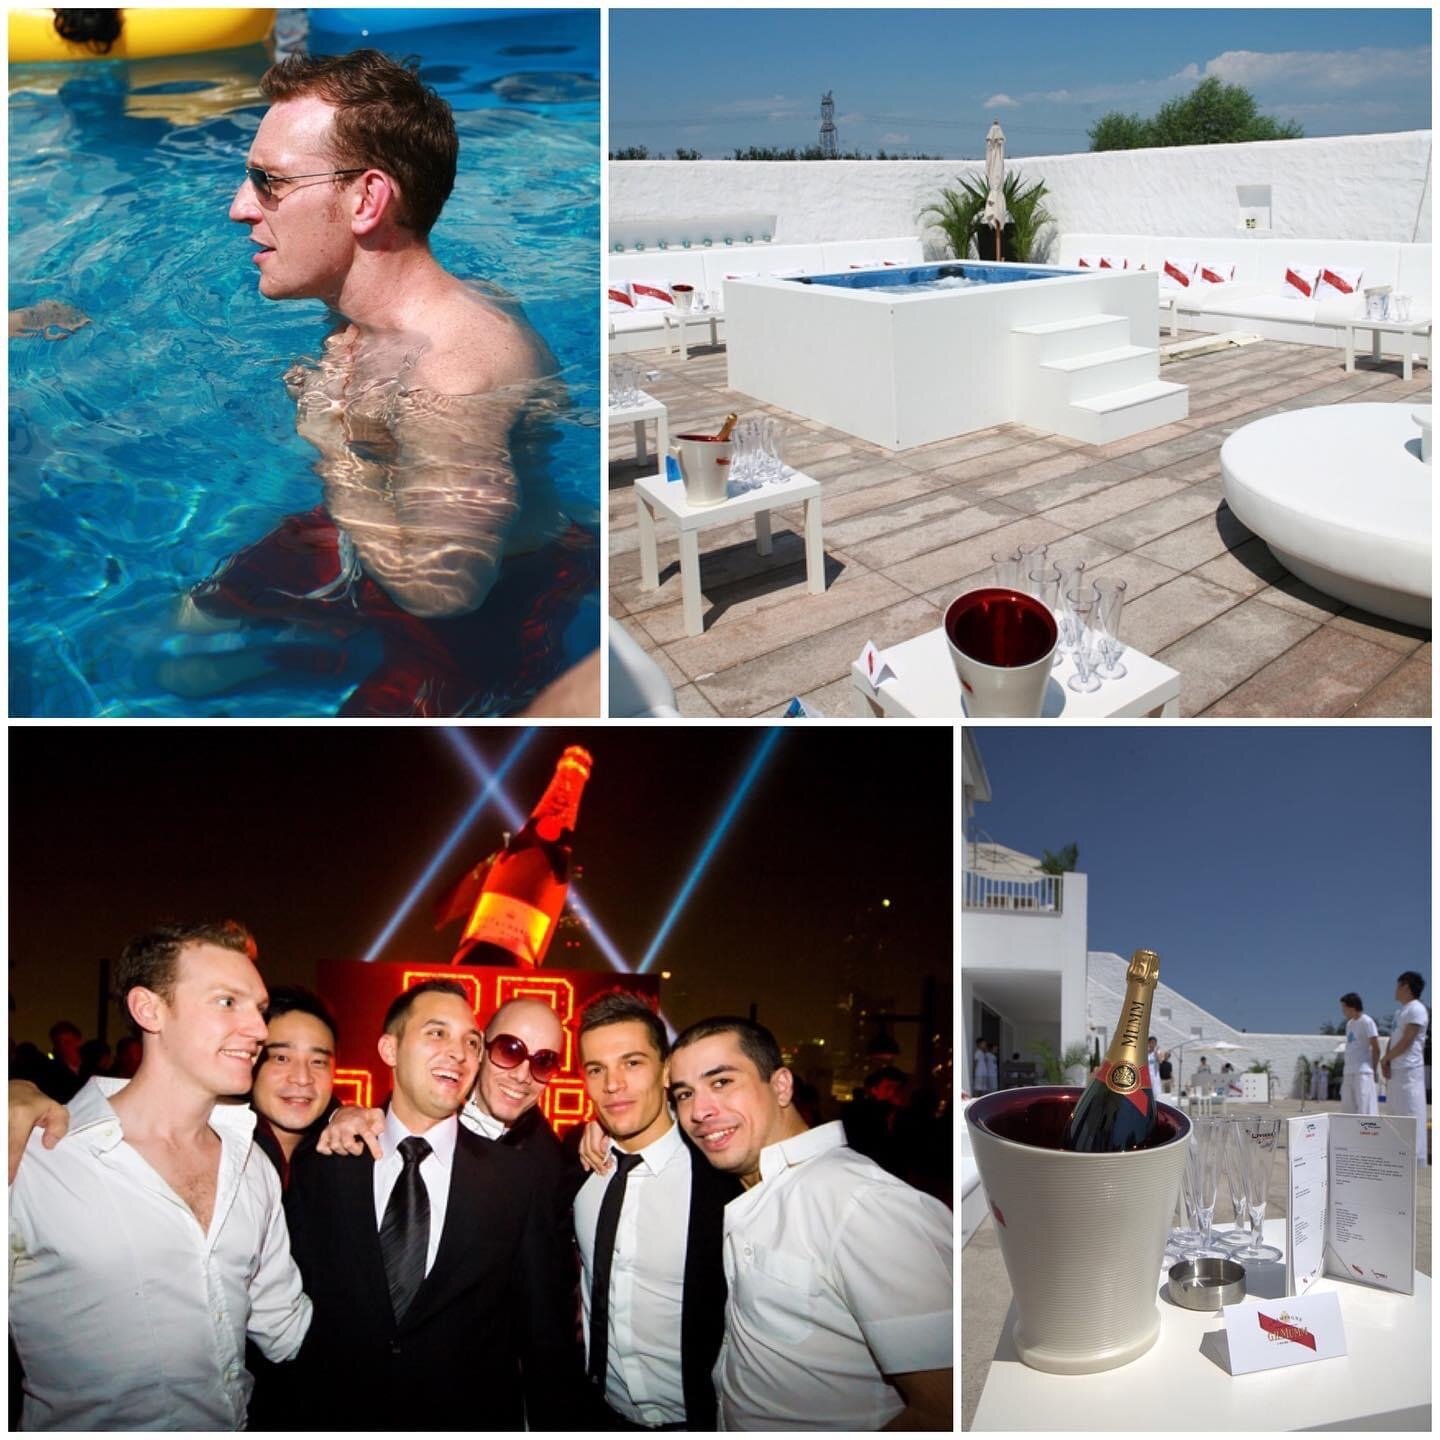 Stephane de Montgros: Some photos from his days as a pool party organiser and club promoter.